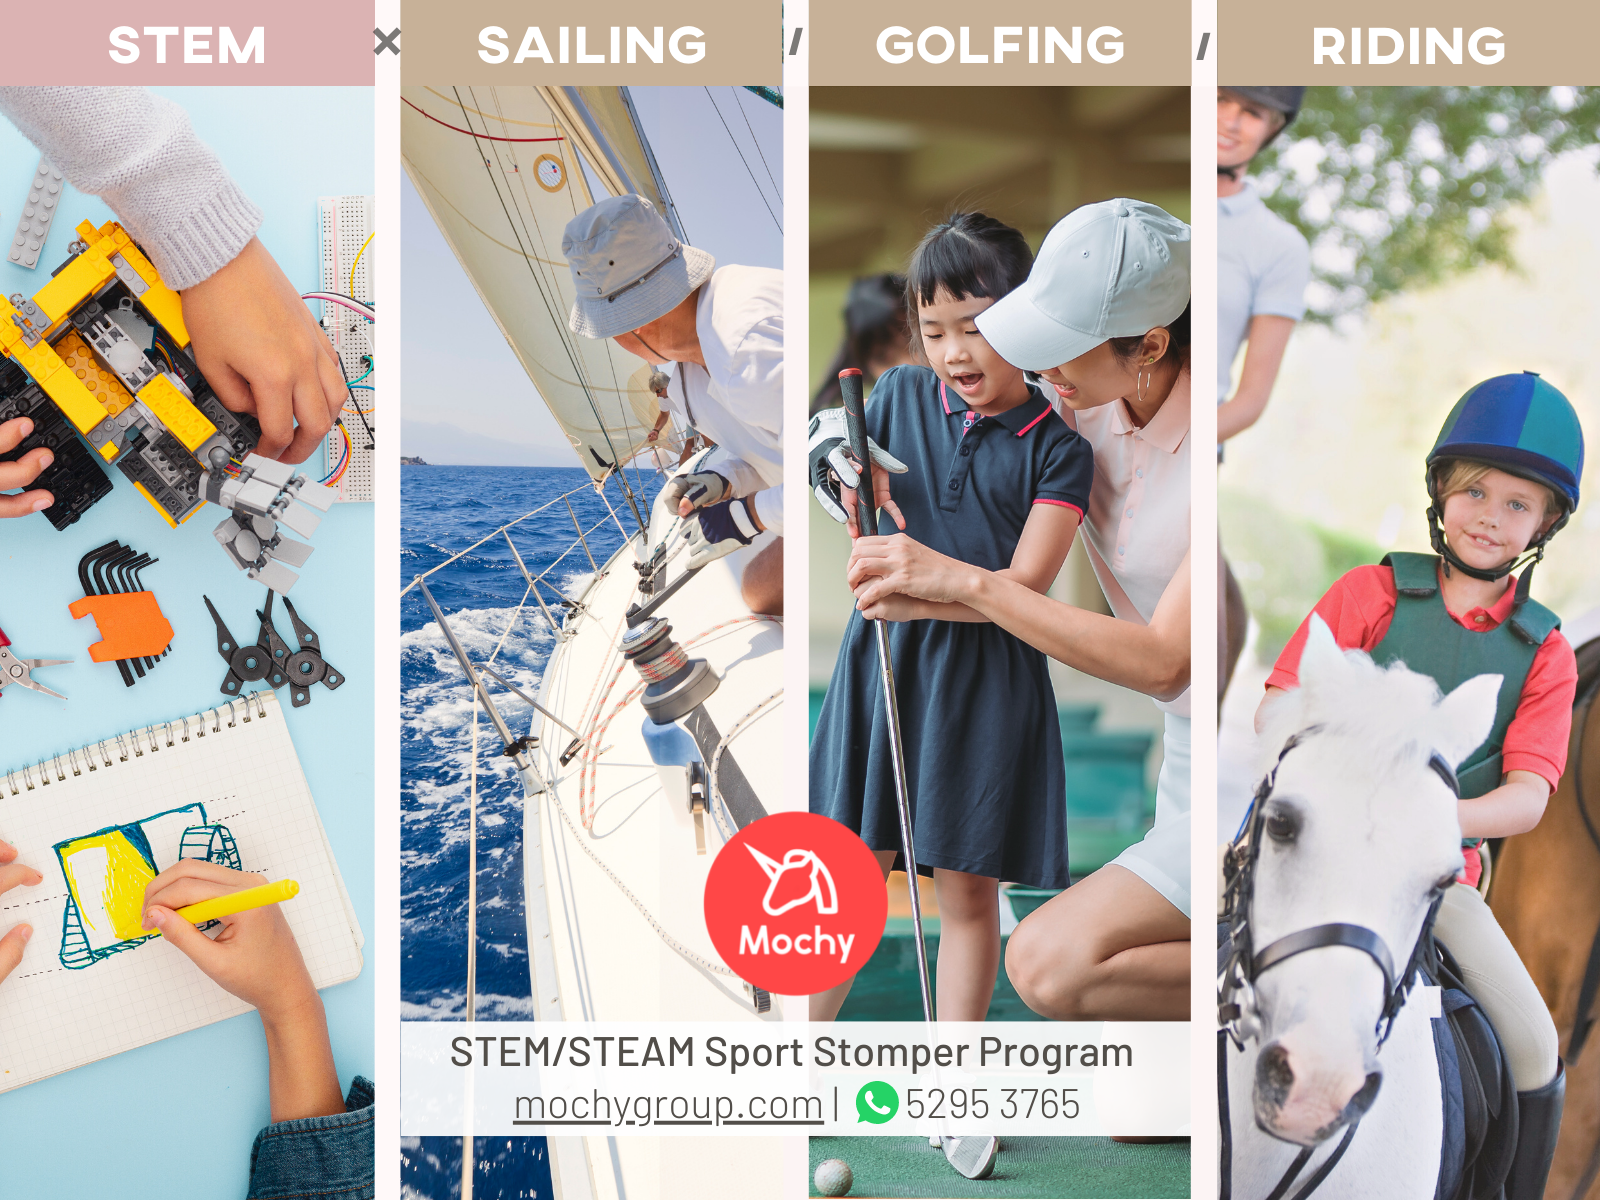 Sporty geeks exist? Mochy Debuts HK’s 1st STEAM Sport Program with Sailing, Horse Riding, Golf Pros⛵🐴⛳